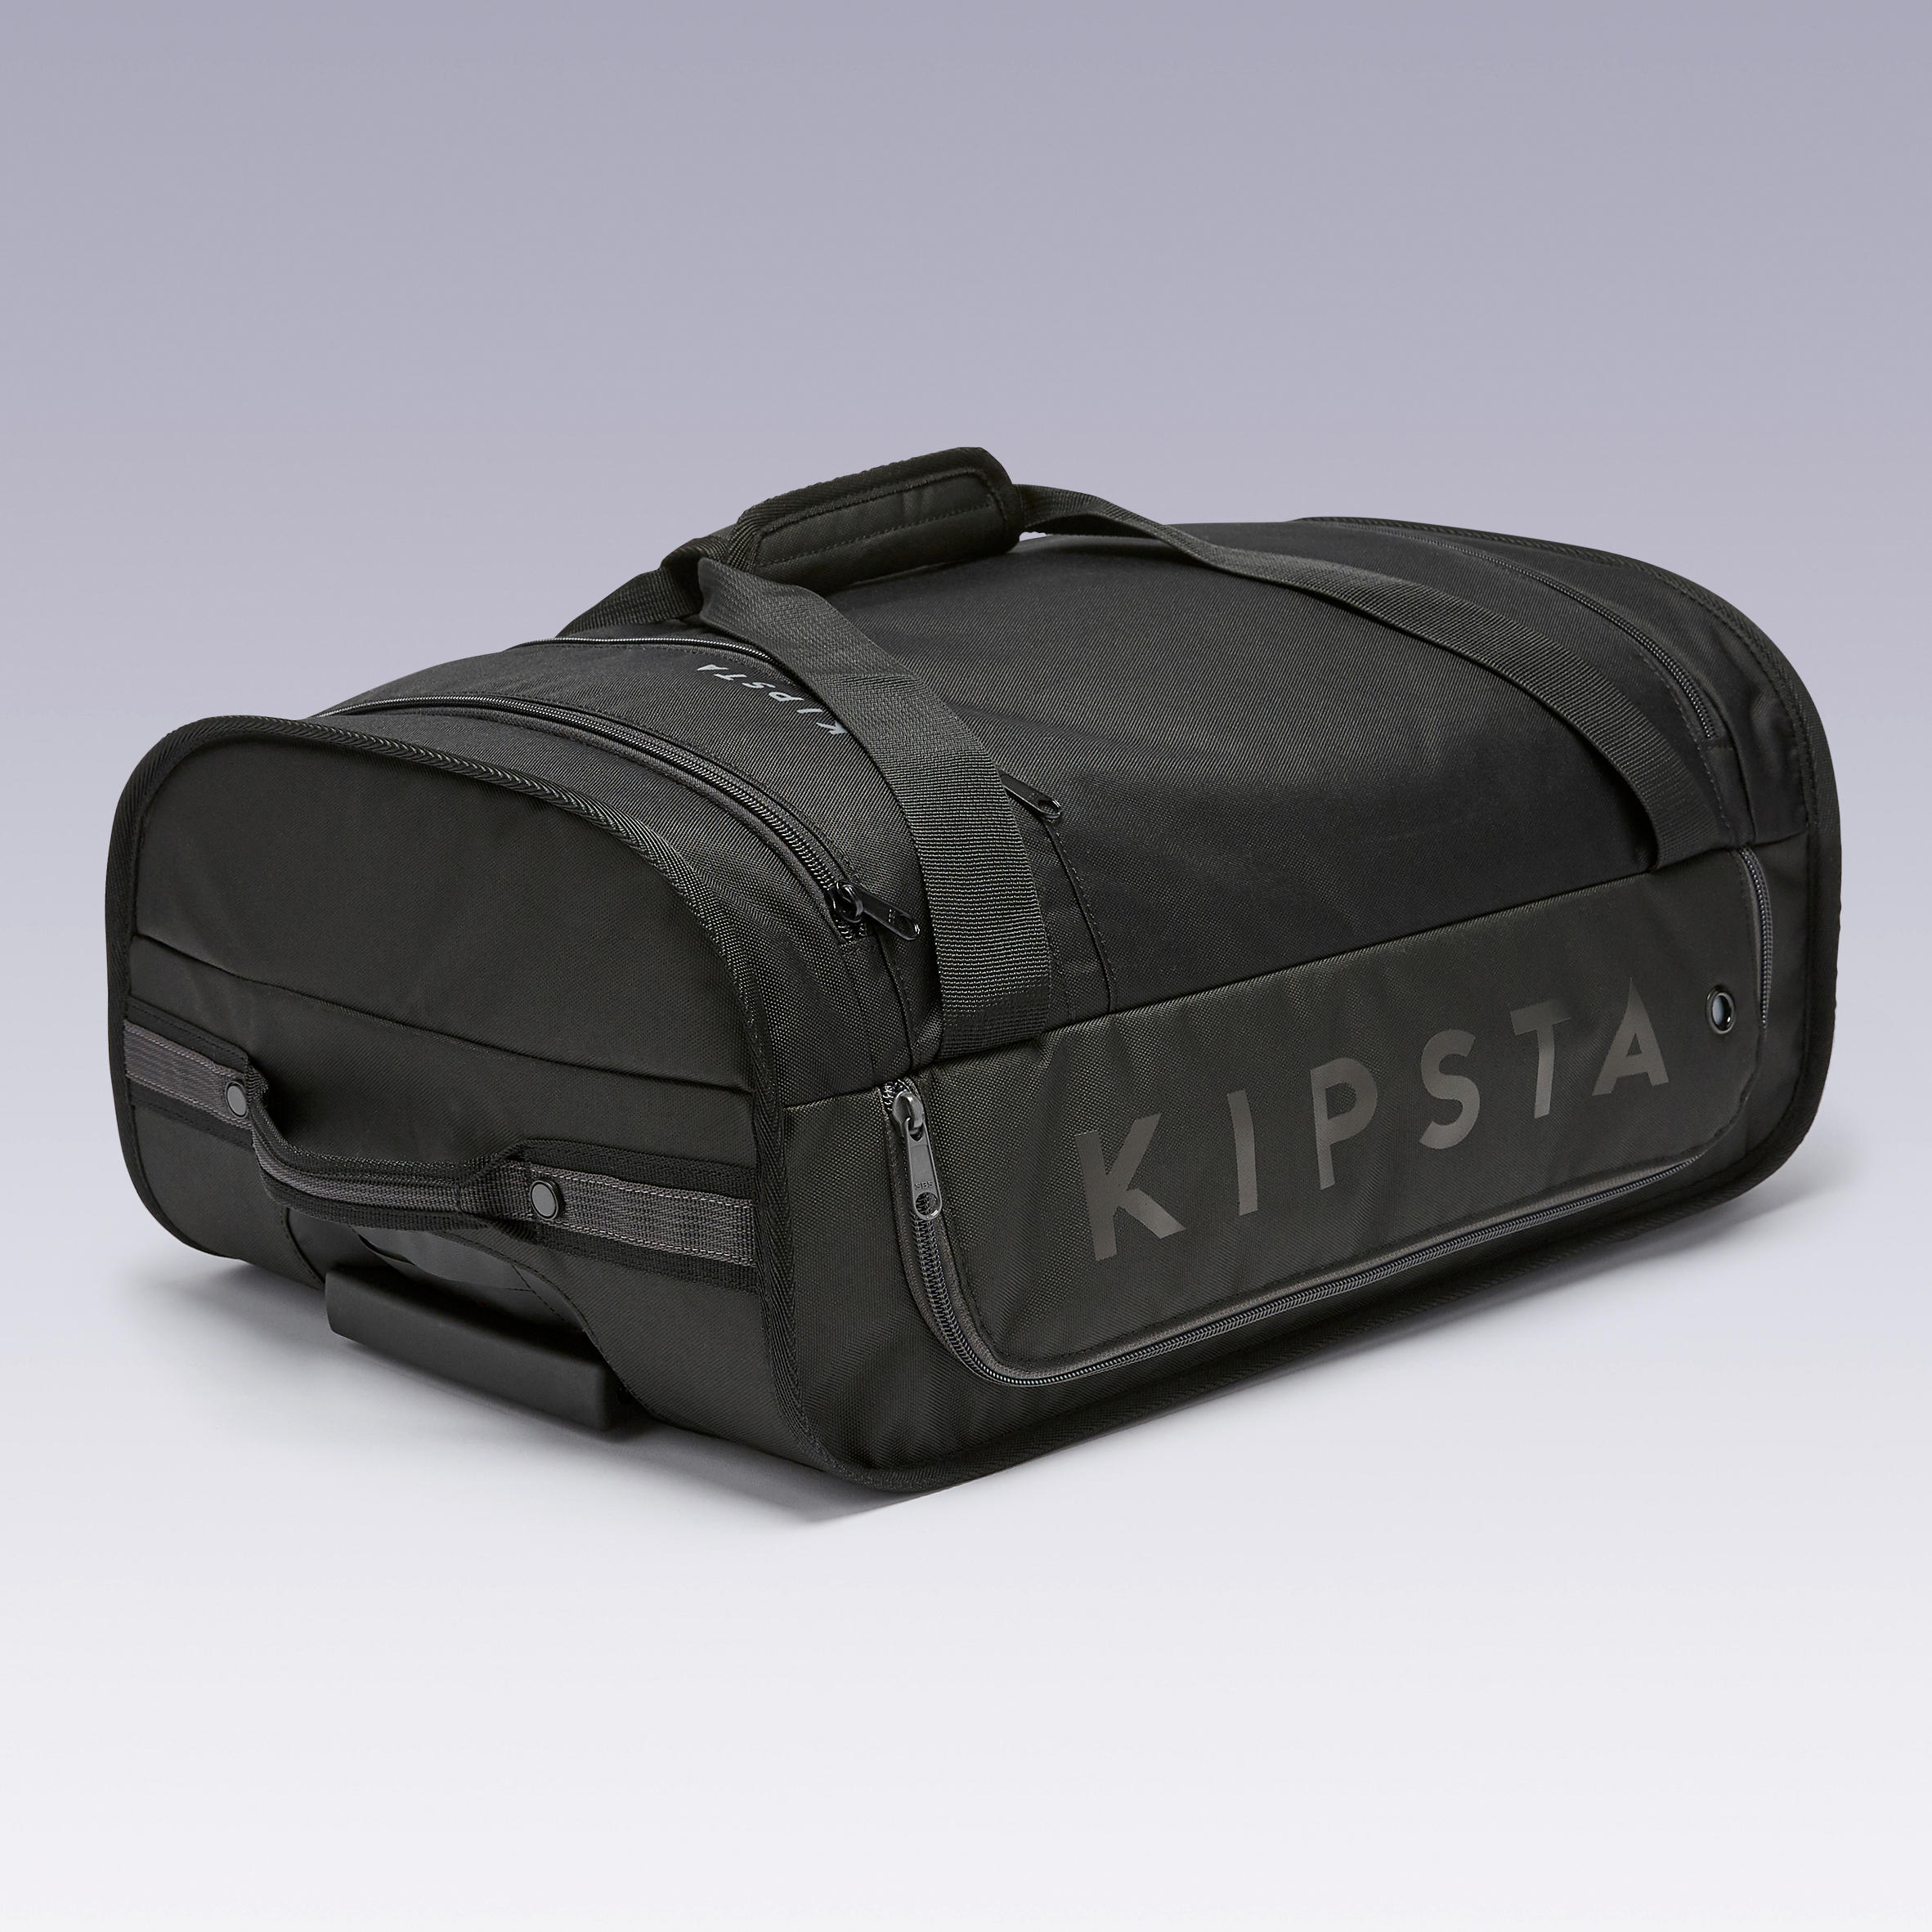 Kipsta 30L roller bag, Hobbies & Toys, Travel, Luggage on Carousell